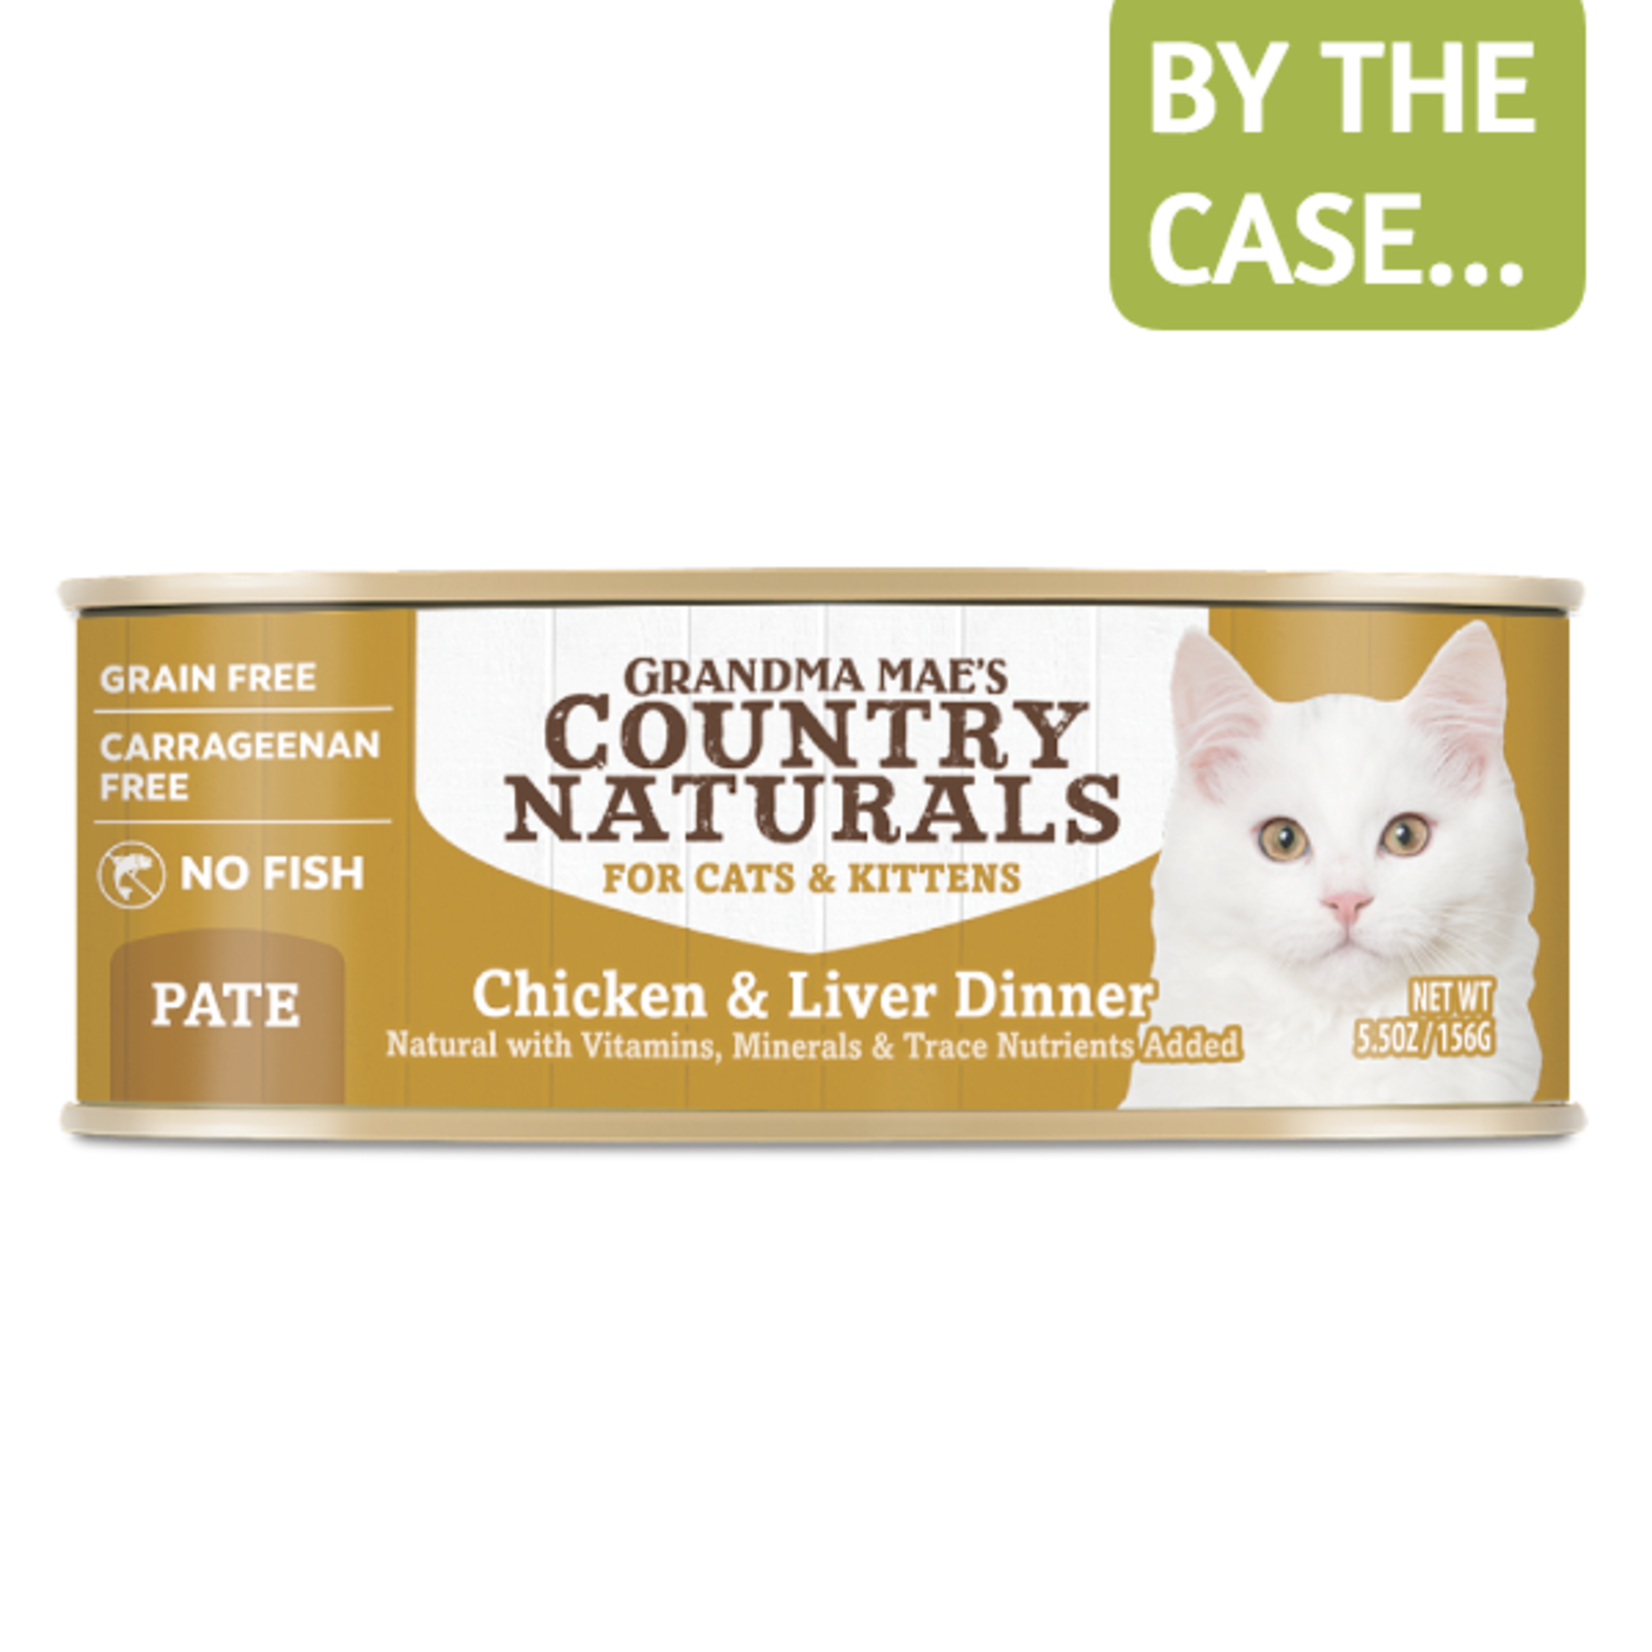 Grandma Maes Country Naturals Grandma Mae's Country Naturals Wet Cat Food Chicken and Liver Dinner Pate 5.5oz Grain Free